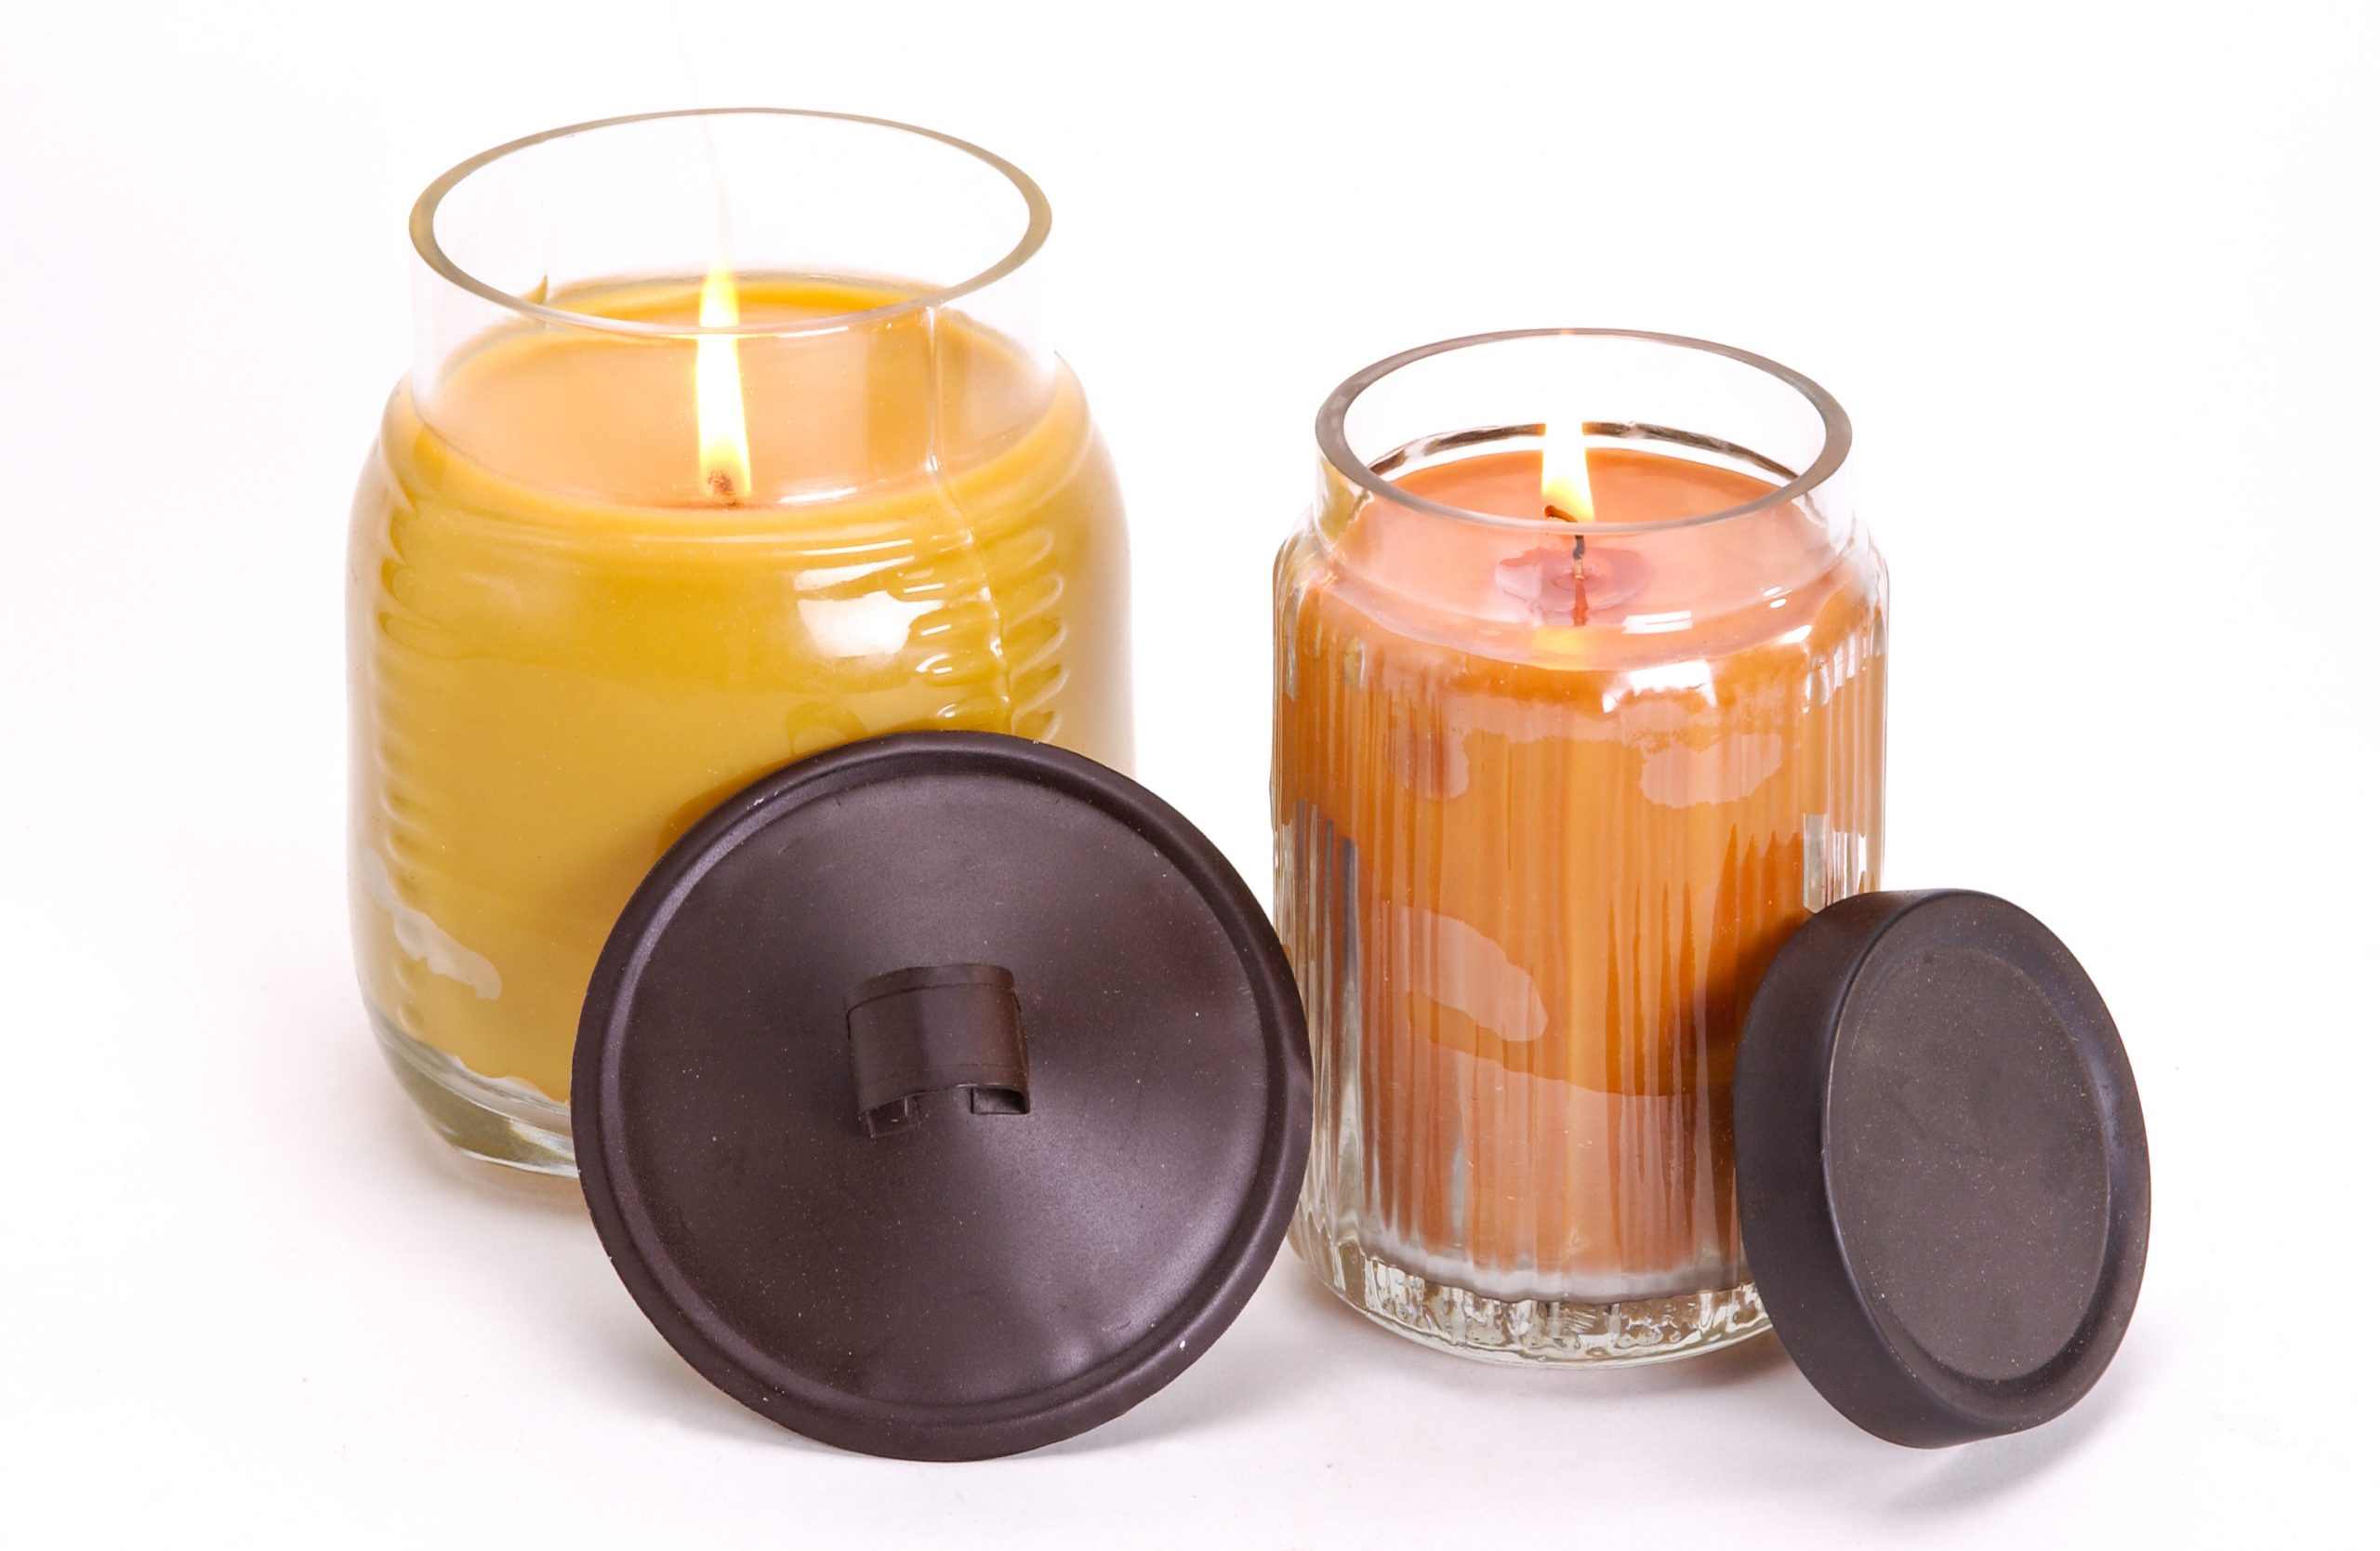 Scented Candles and Air Fresheners Pose Dangerous Health Risks